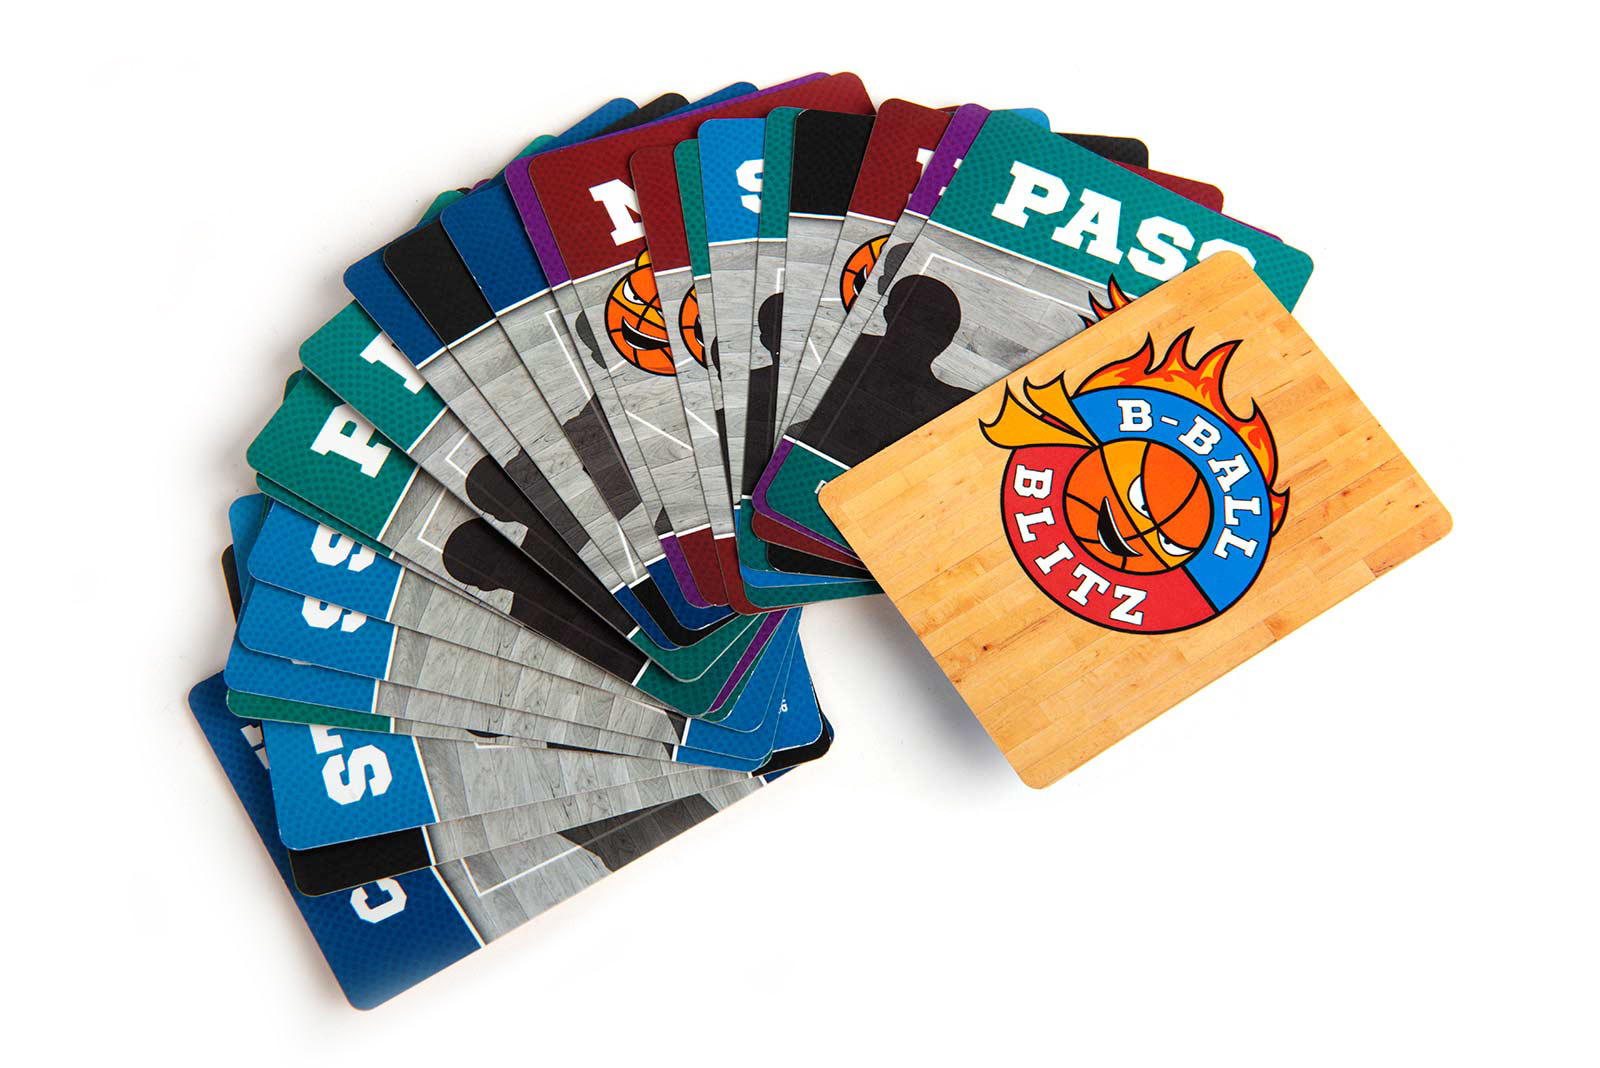 b-ball-blitz-family-party-game-action-cards.jpg